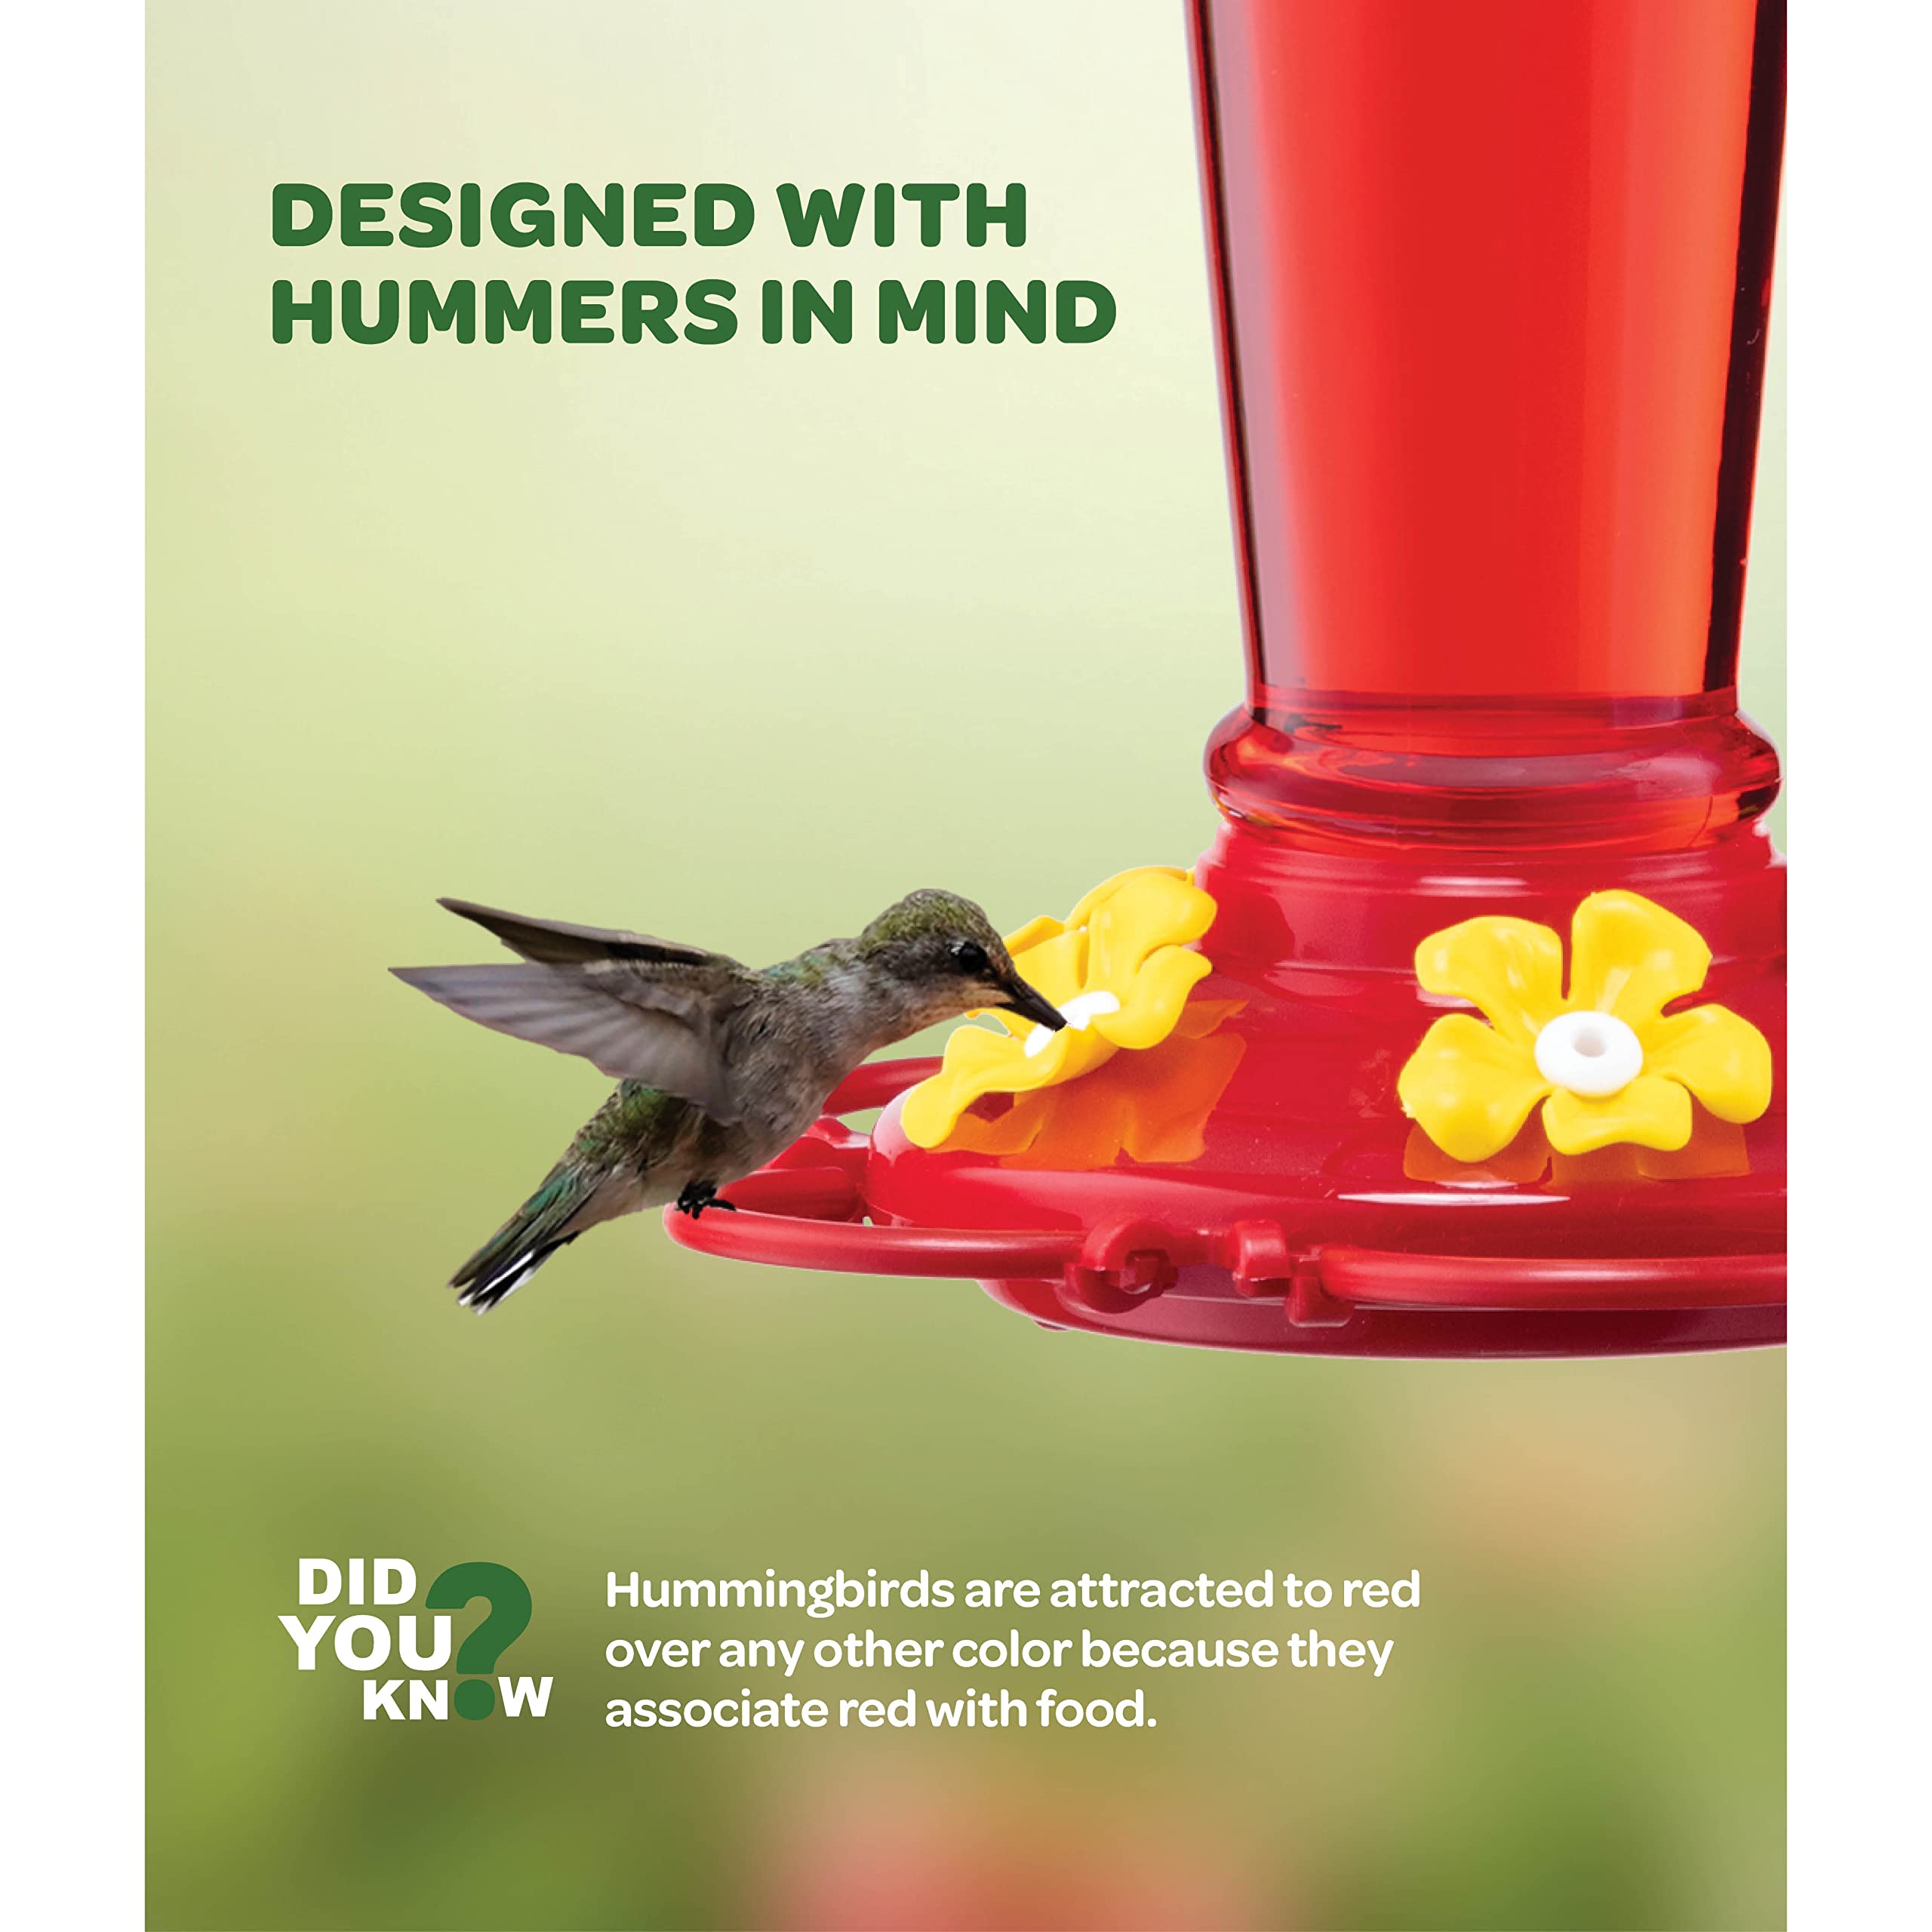 Hummingbird Feeder 10 oz [Set of 2] Plastic Feeders for Outdoors, with Built-in Ant Guard - Circular Perch with 5 Feeding Ports - Wide Mouth for Easy Filling/2 Part Base for Easy Cleaning  - Like New